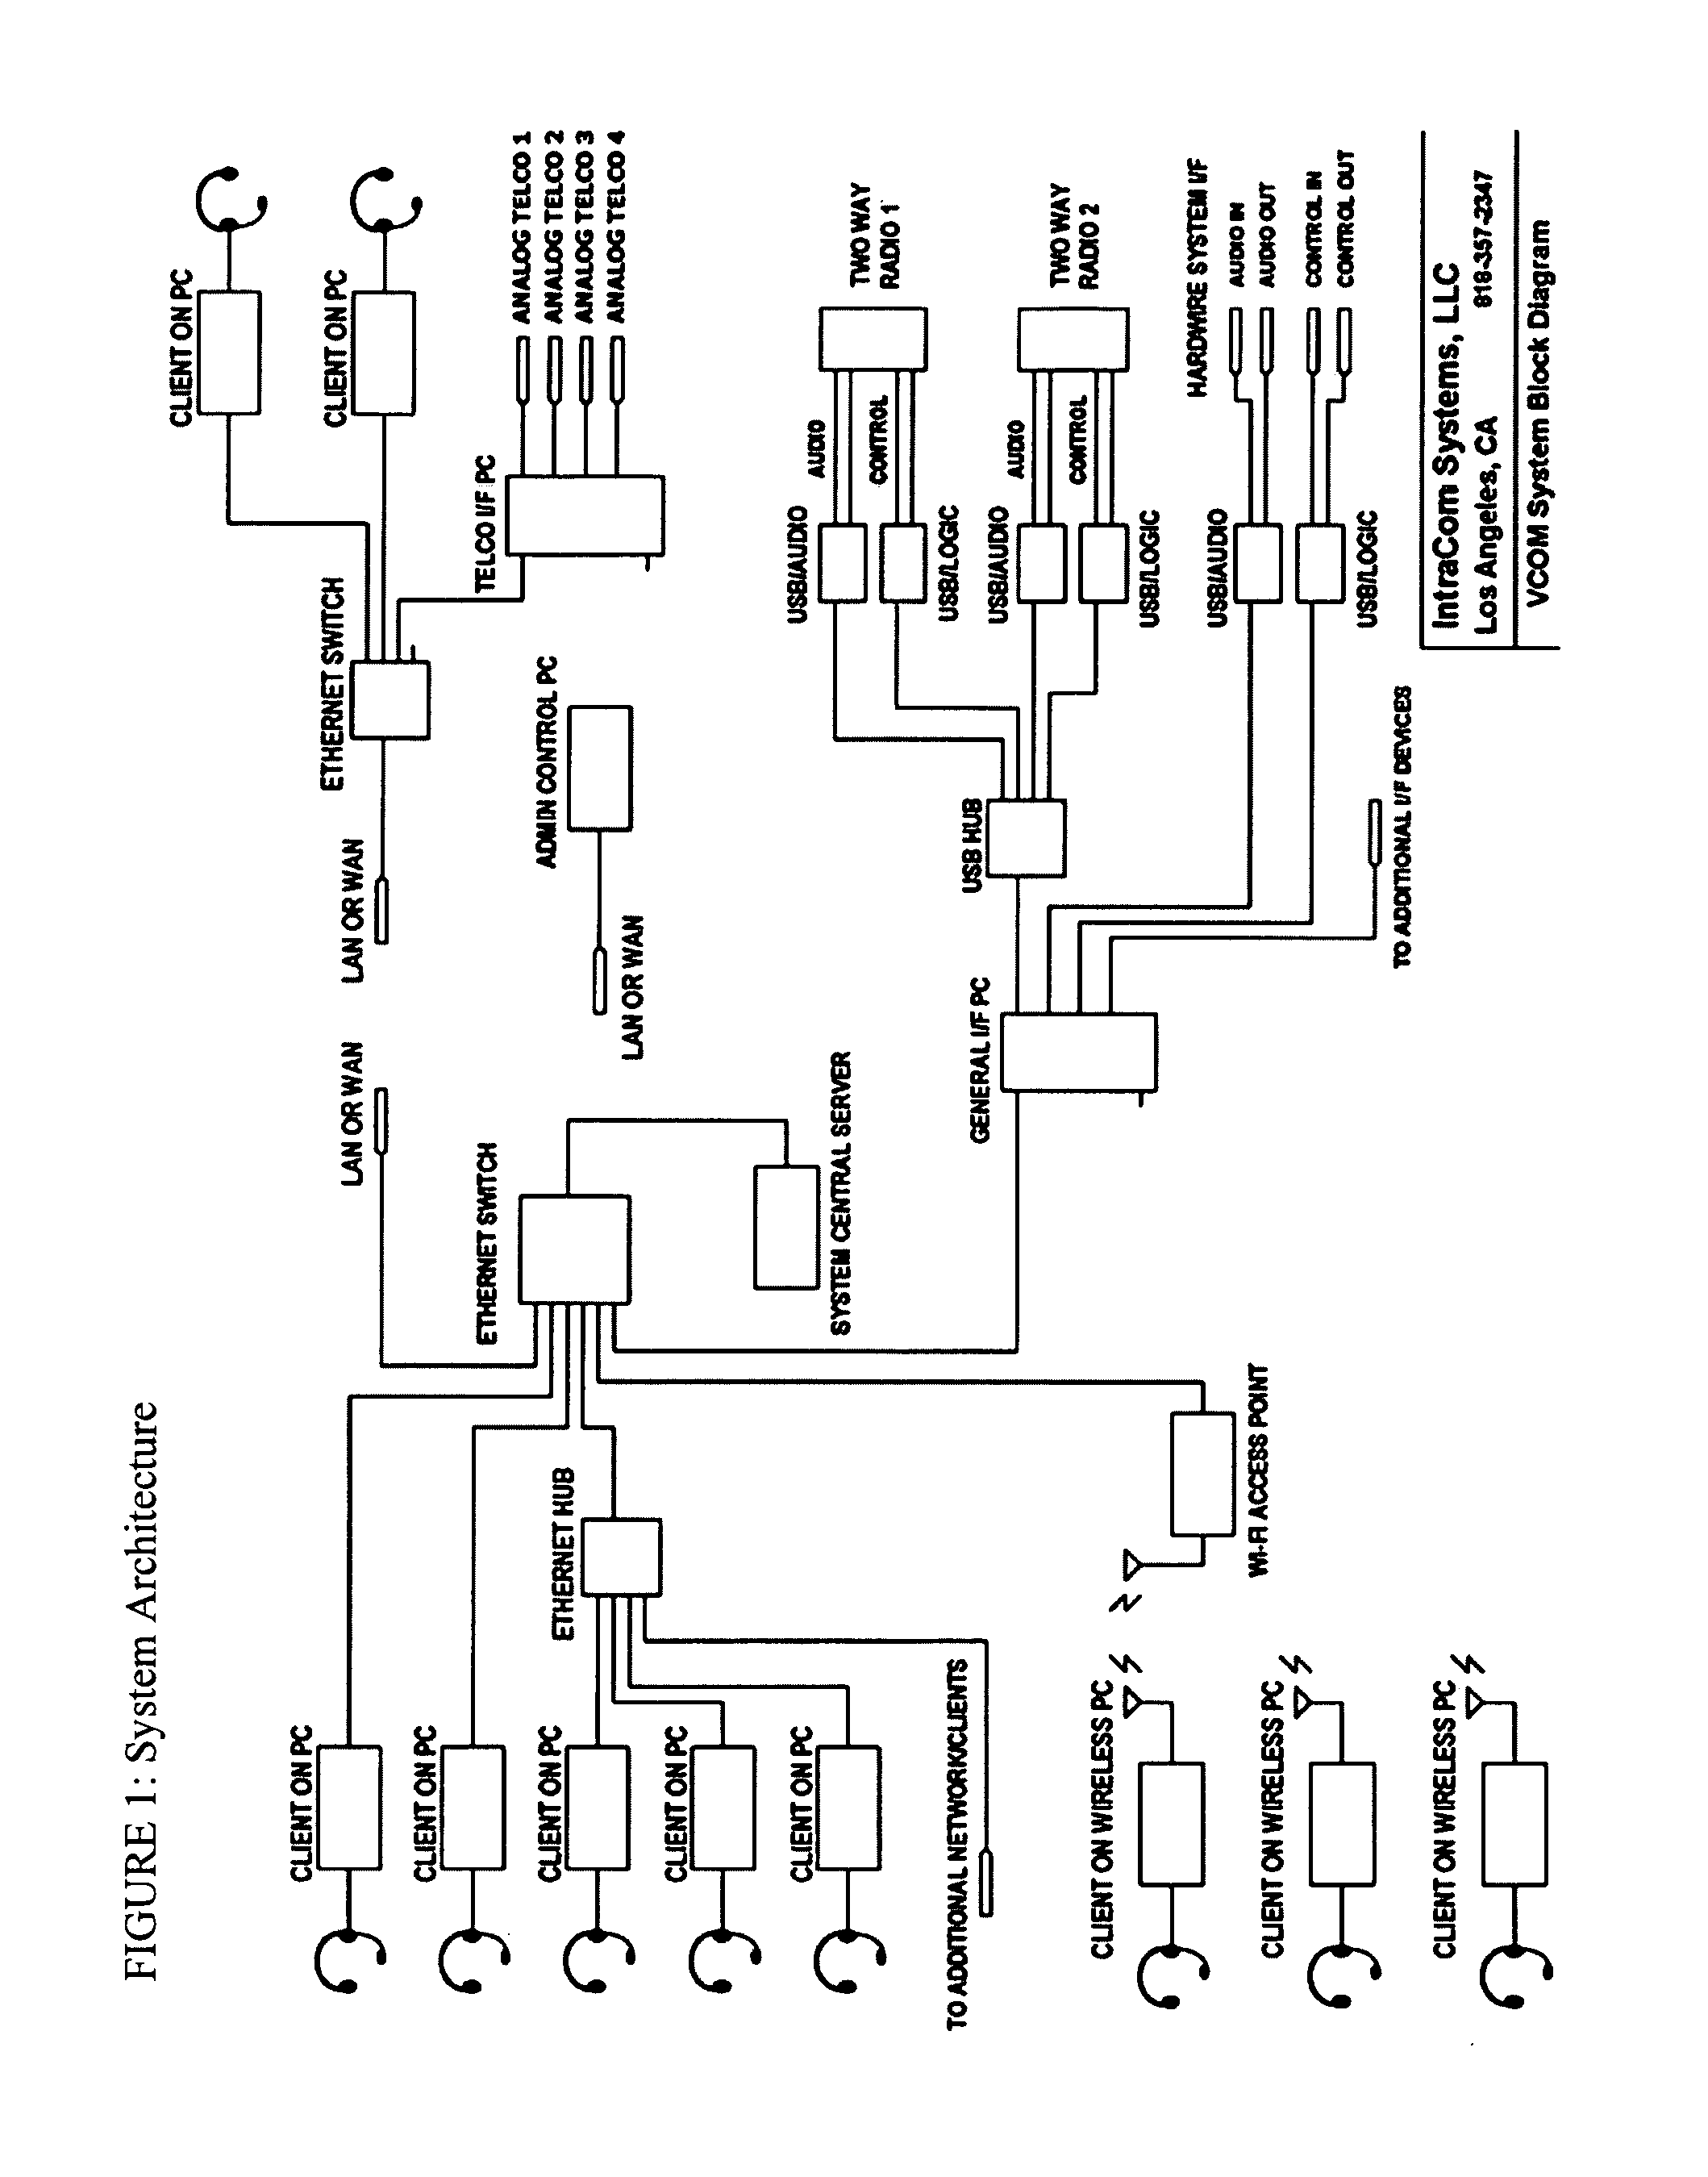 Multi-channel multi-access voice over IP intercommunication systems and methods